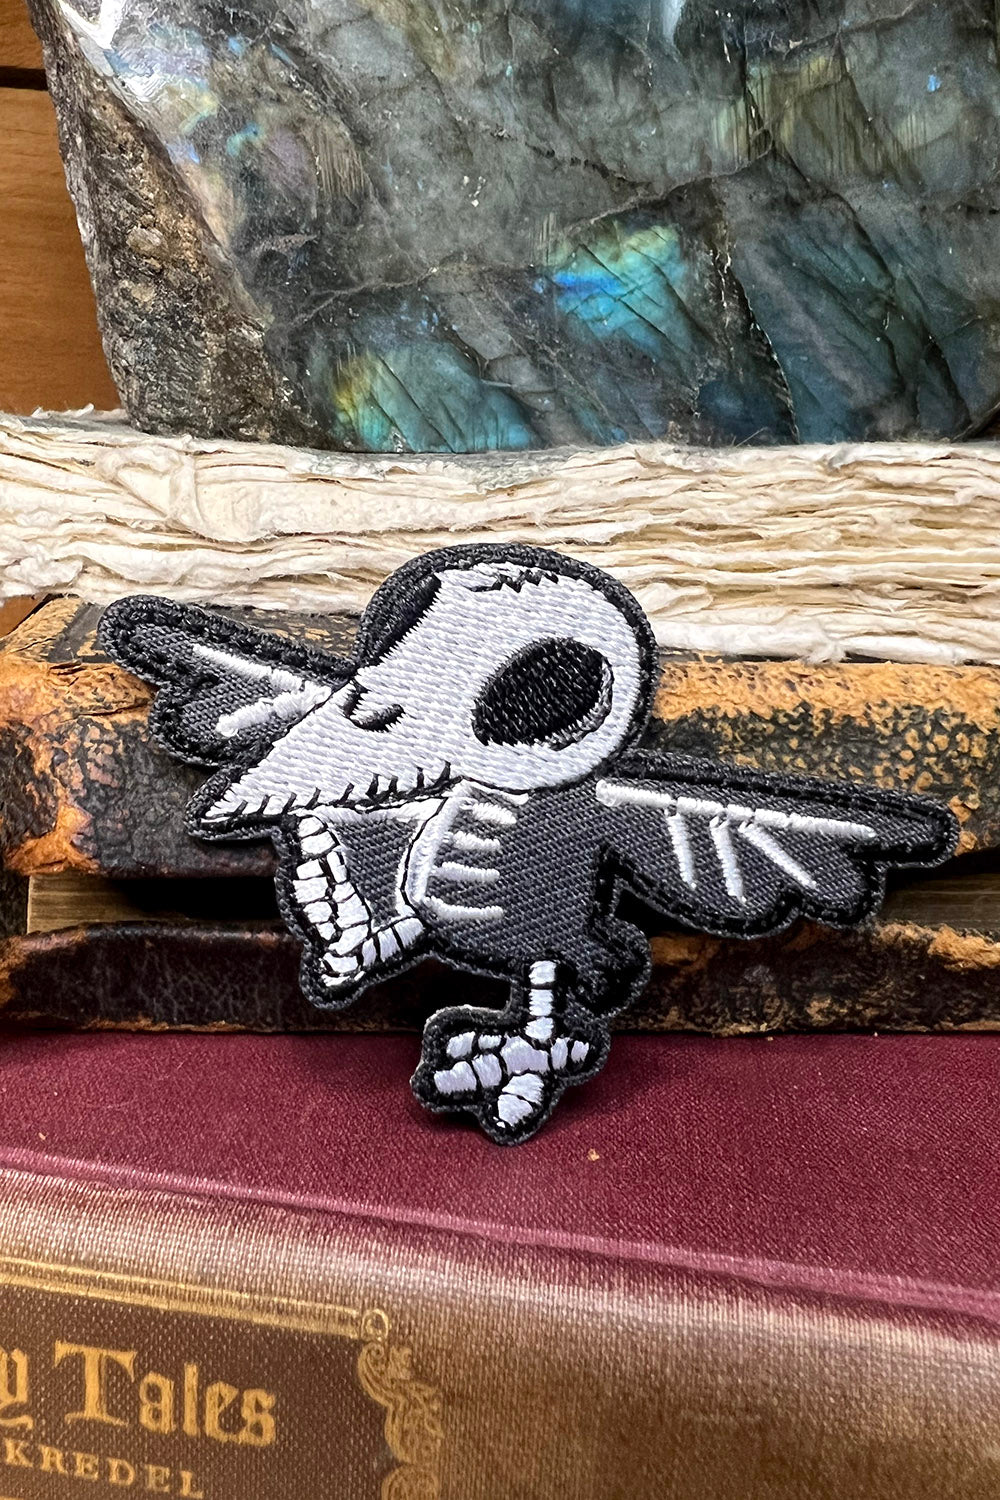 Pin on The Raven's Tale